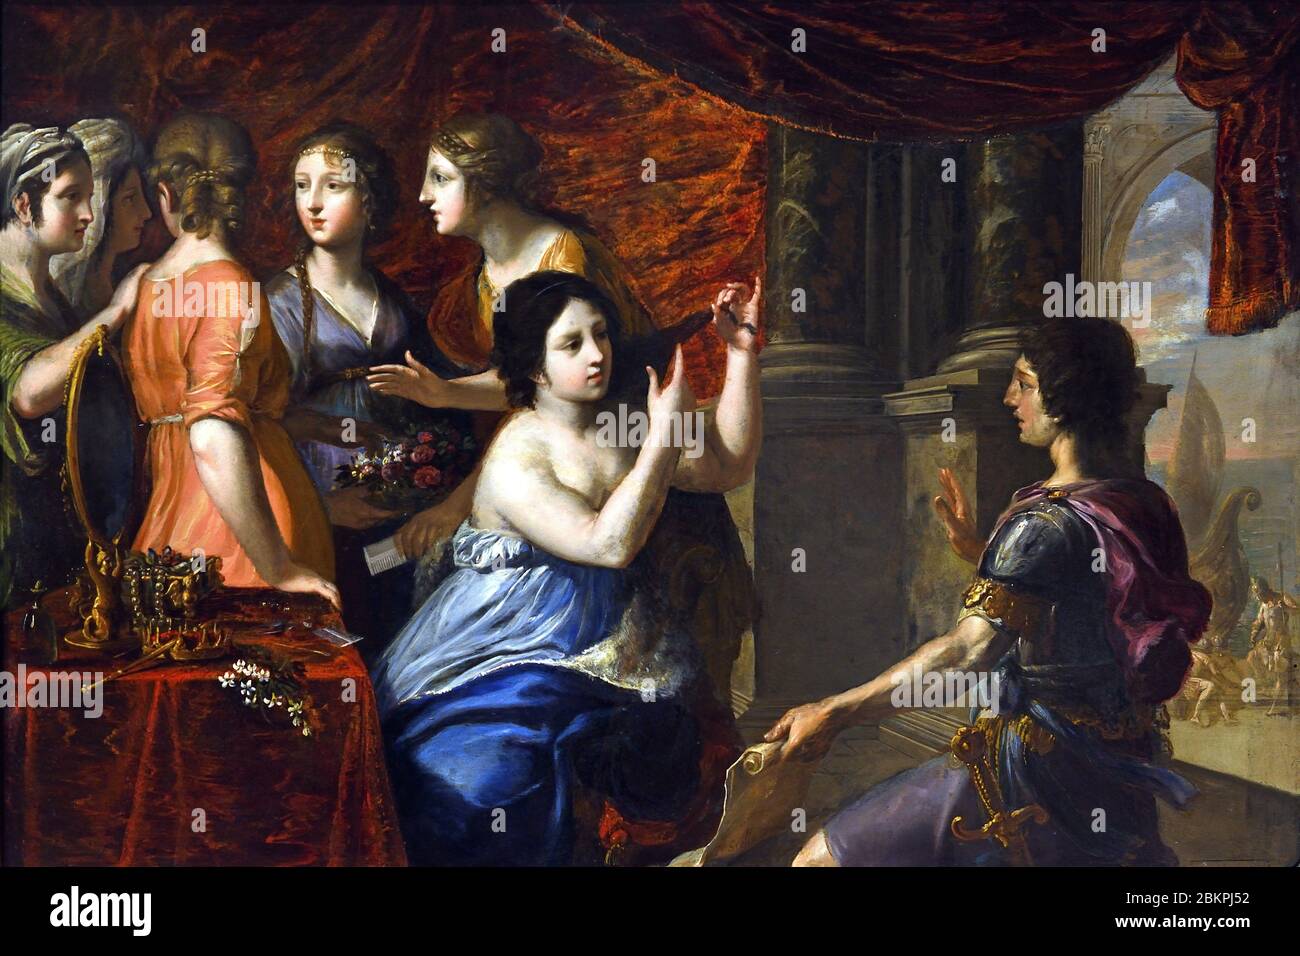 Semiramis Called to Arms 1637 by Jacques Stella 1596-1657 France French (Interrupted at her toilette by news of a revolt, Semiramis, the legendary queen of Assyria, demonstrated her determination as a ruler by refusing to finish combing her hair until she had led her army to crush the rebels. ) Stock Photo